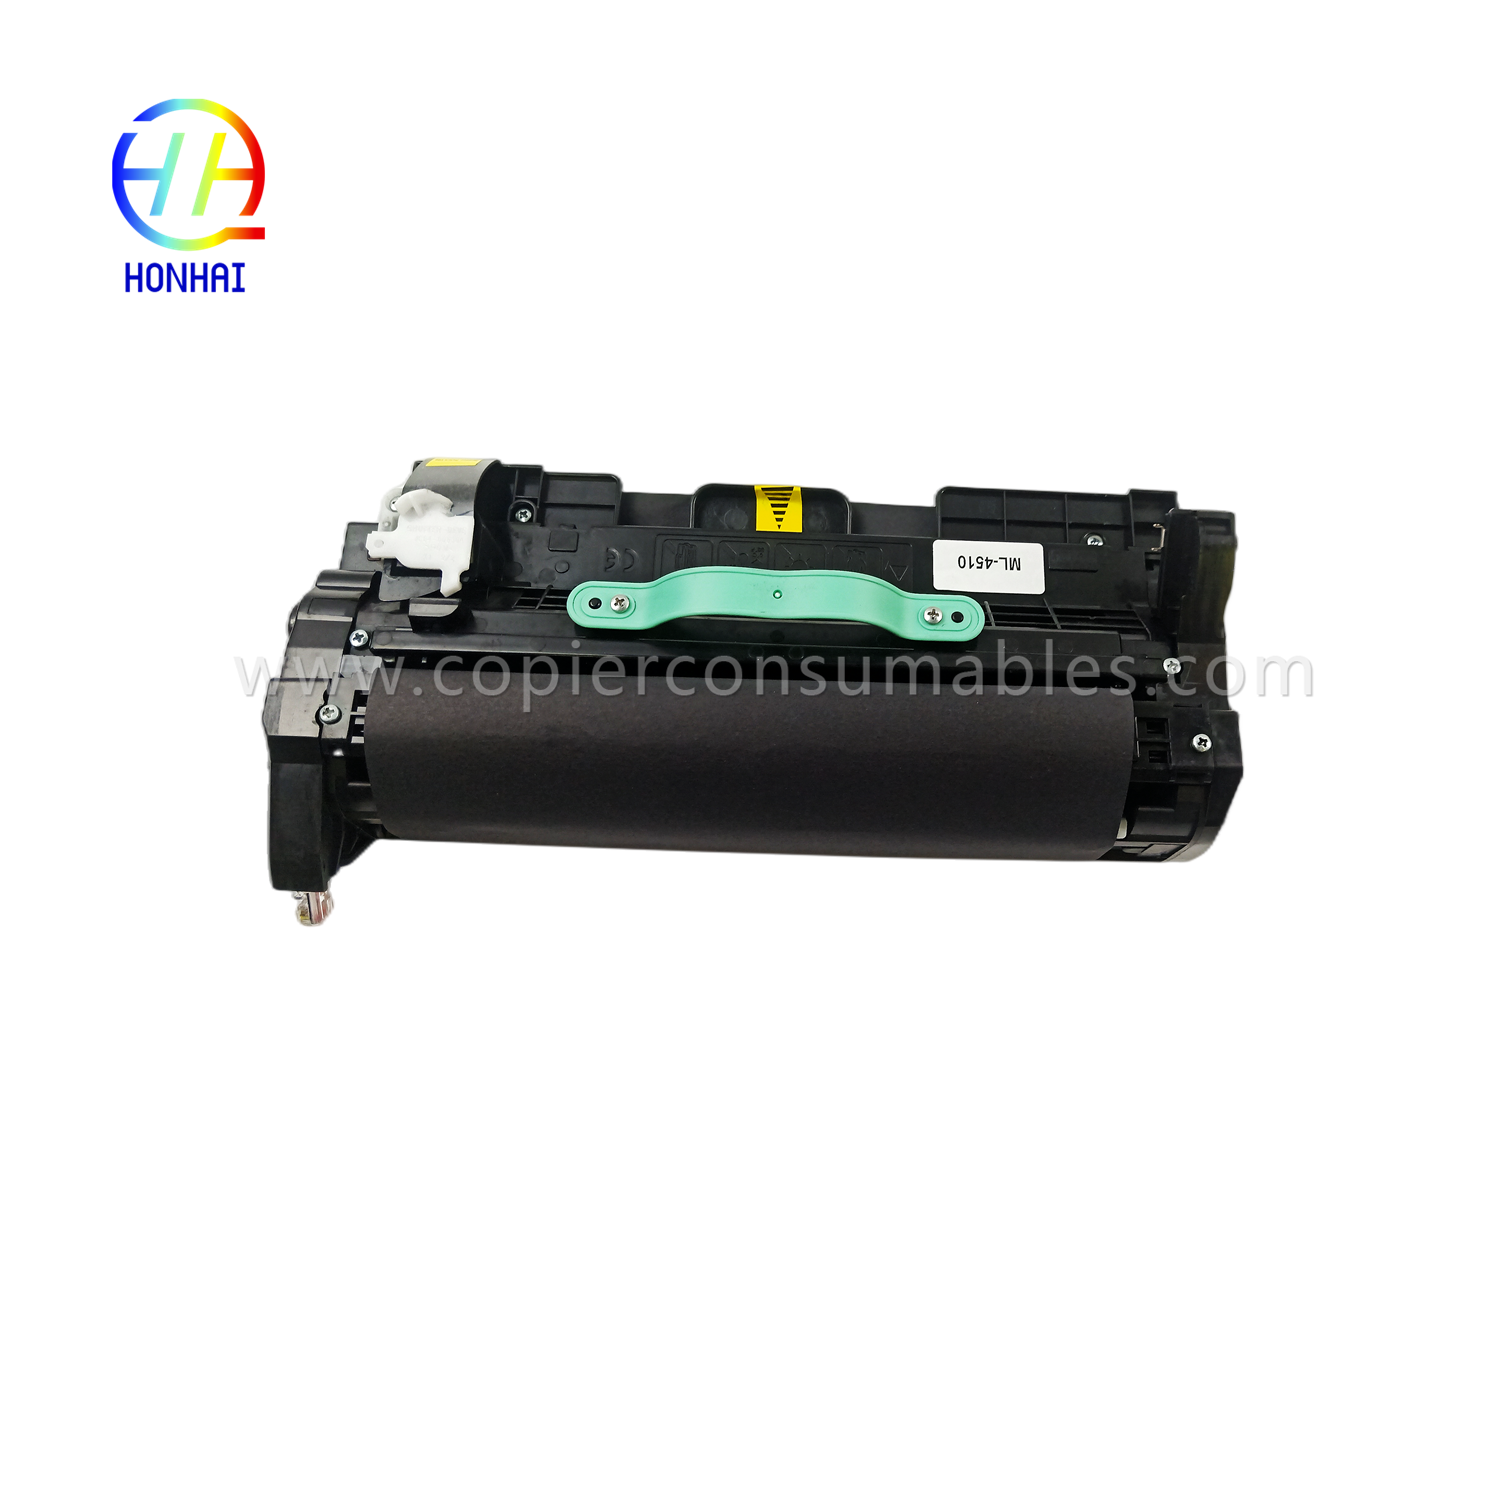 https://www.copierconsumables.com/fuser-unit-for-samsung-ml4510-ml4512-ml-4510nd-ml-4512nd-ml-4510-ml-4512-jc91-01028a-fusing-assembly-2-product